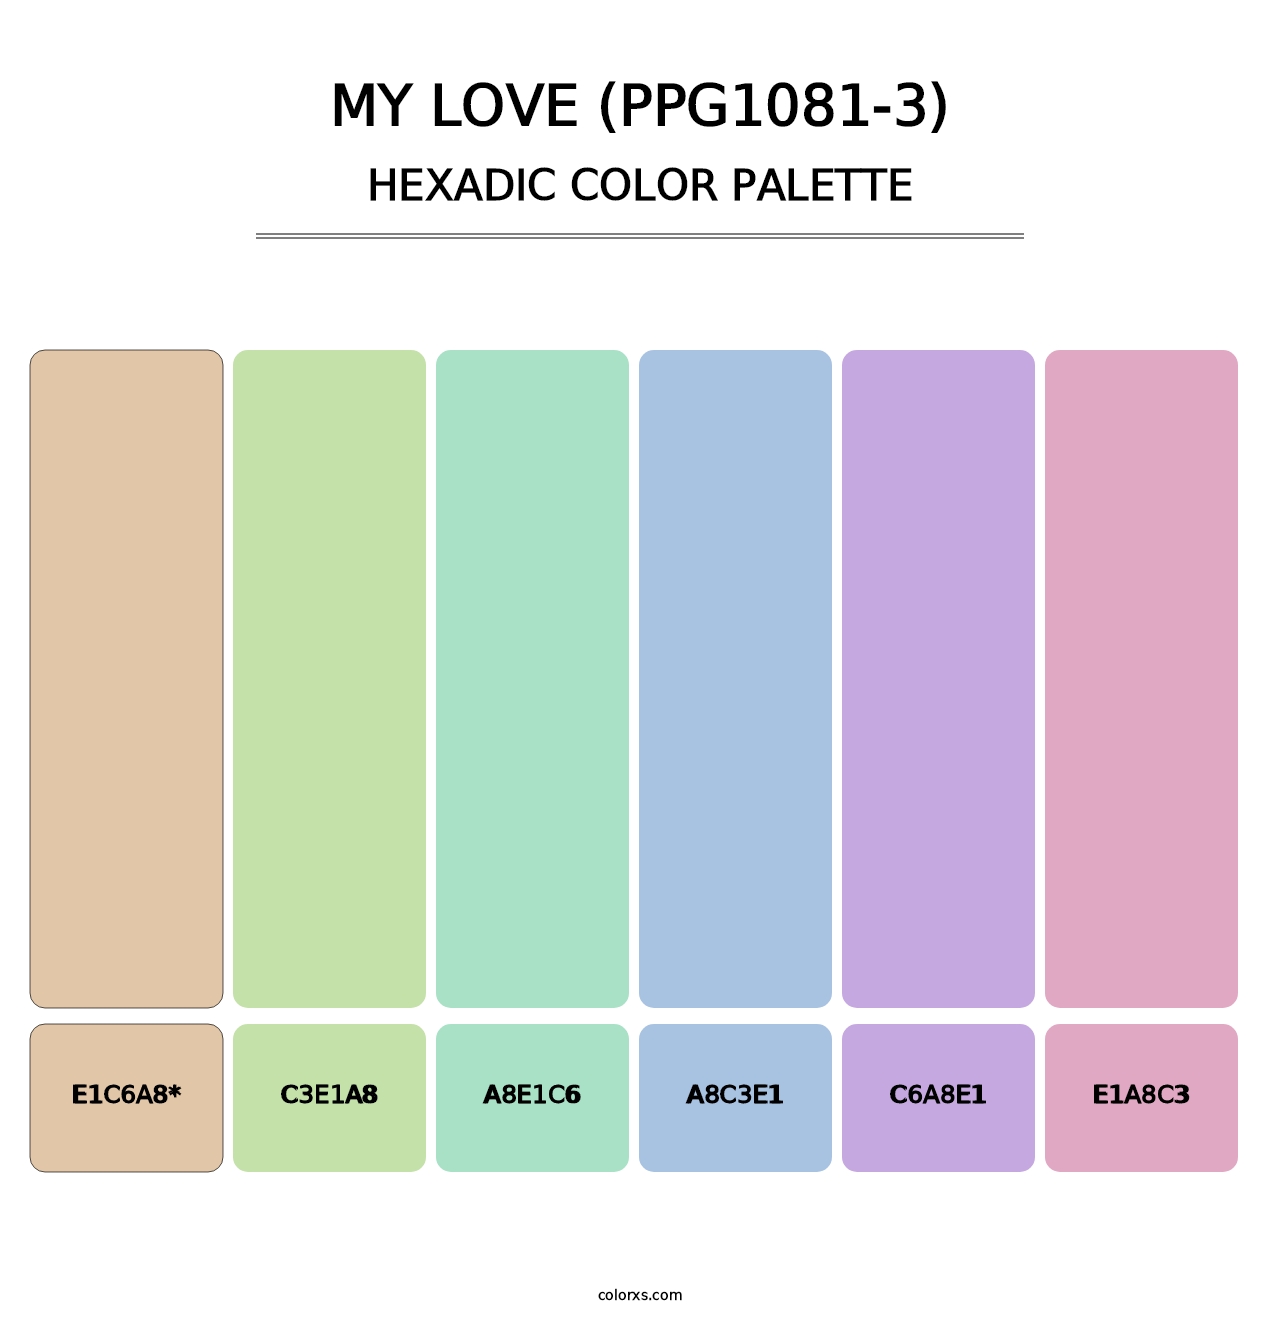 My Love (PPG1081-3) - Hexadic Color Palette